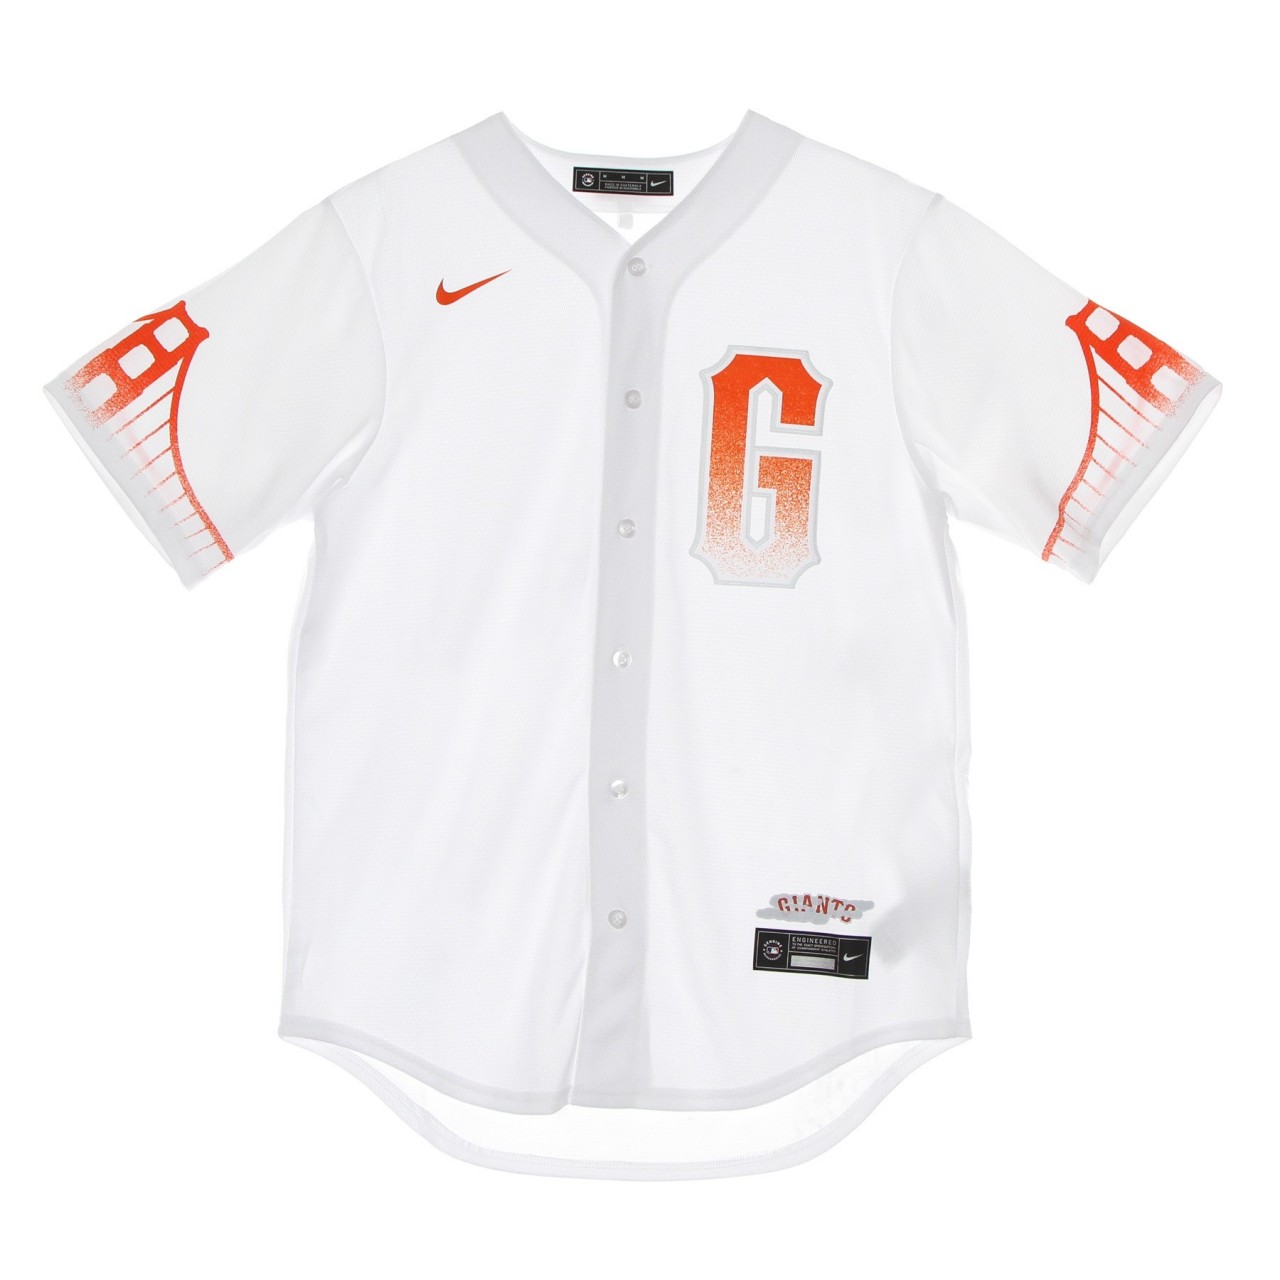 NIKE MLB MLB OFFICIAL REPLICA JERSEY CITY CONNECT SAFGIA T770-GICC-GIA-KMH:260